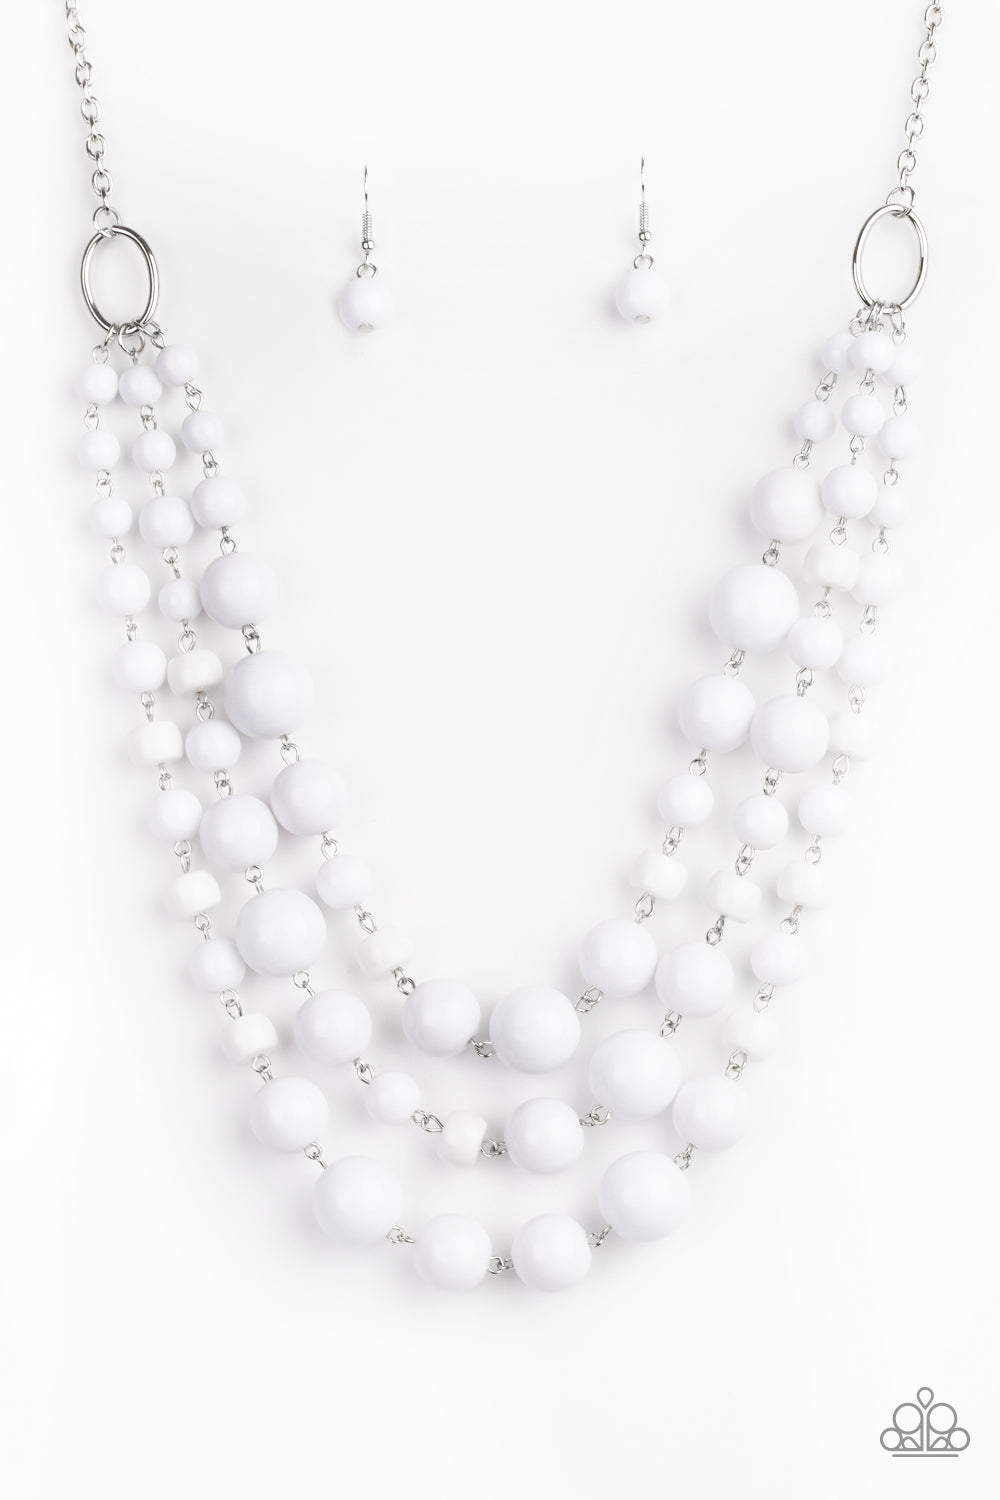 Everyone Scatter!- White Necklace